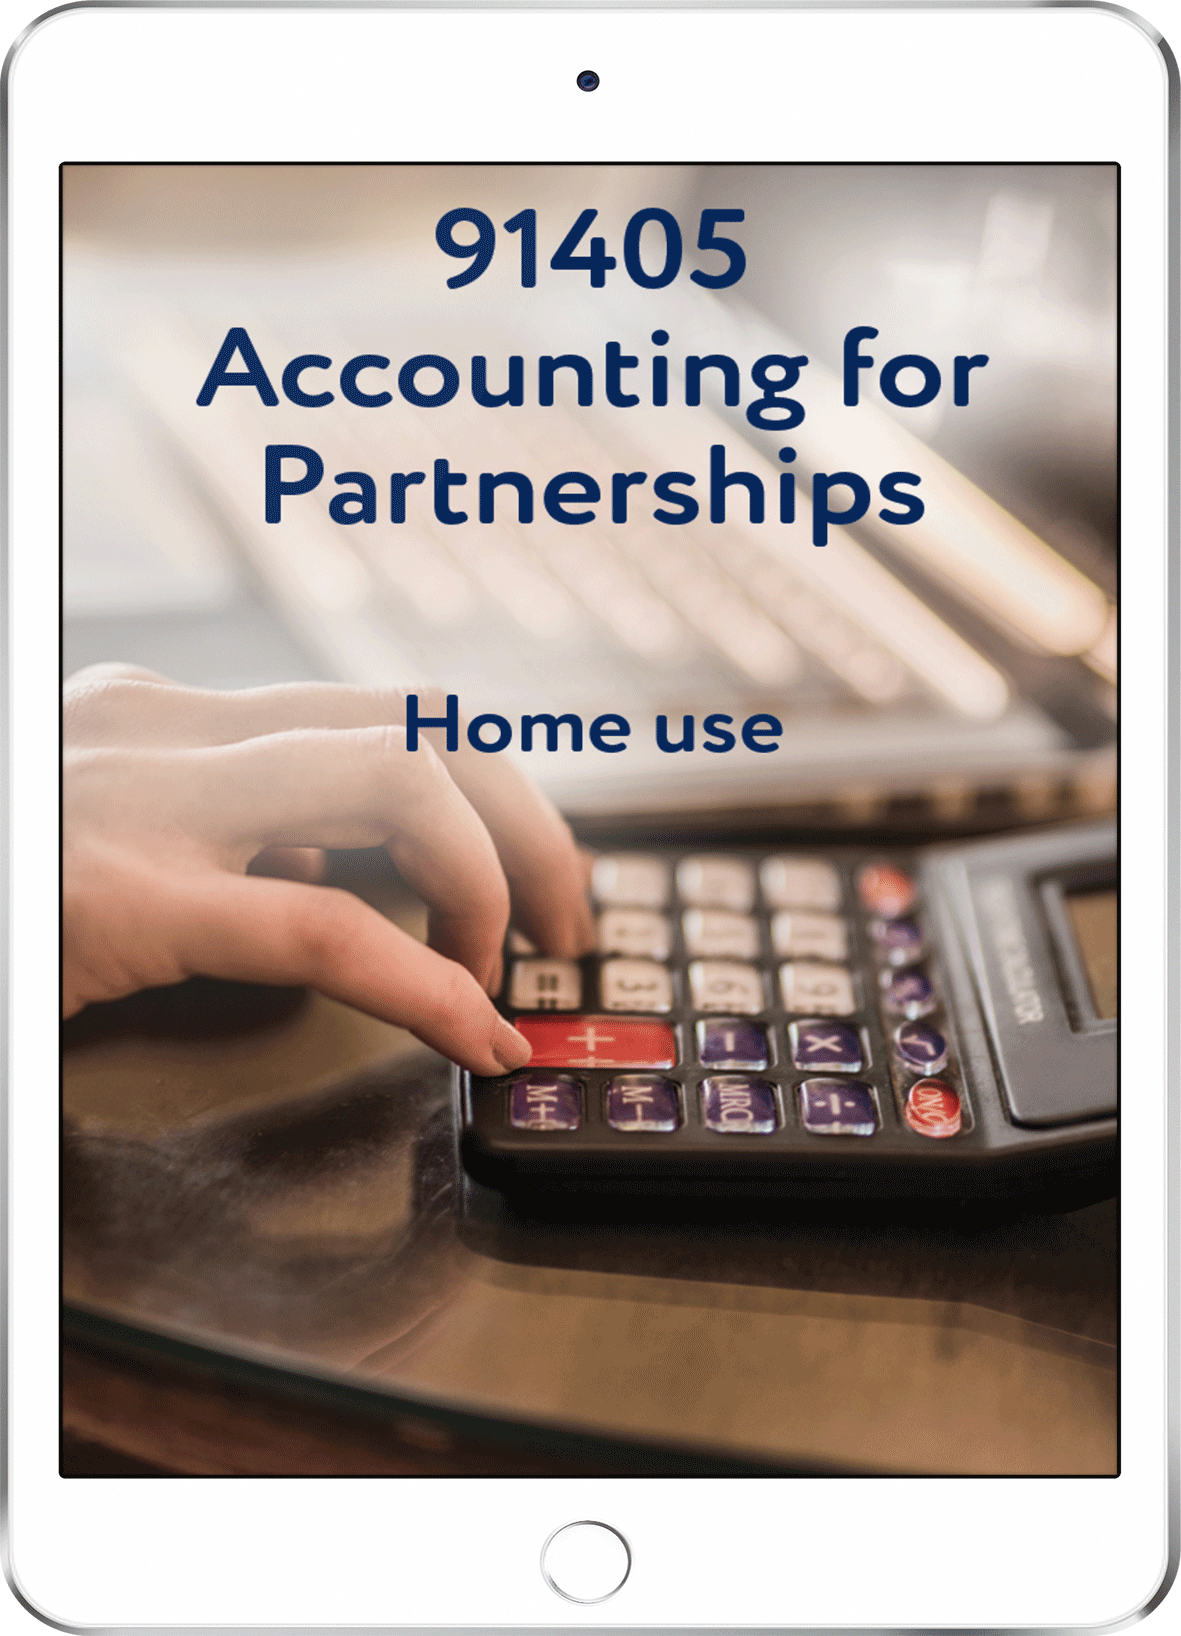 91405 Accounting for Partnerships - Home Use